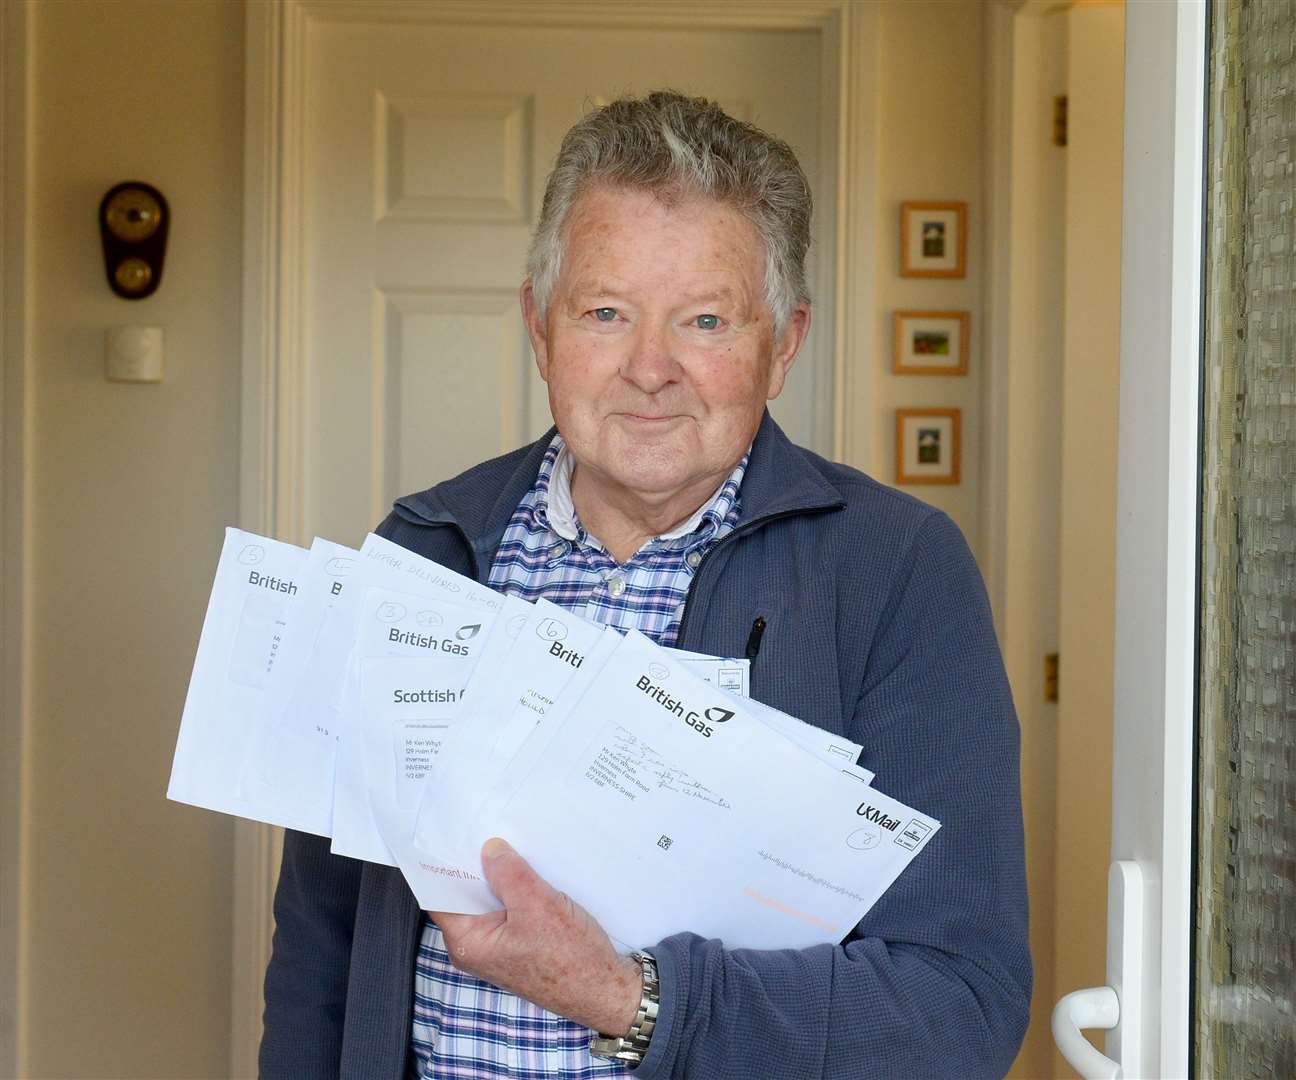 Inverness pensioner Ken Whyte is in long-running dispute with British Gas over payment of a carbon monoxide gas alarm that he had fitted. Picture: Gary Anthony.